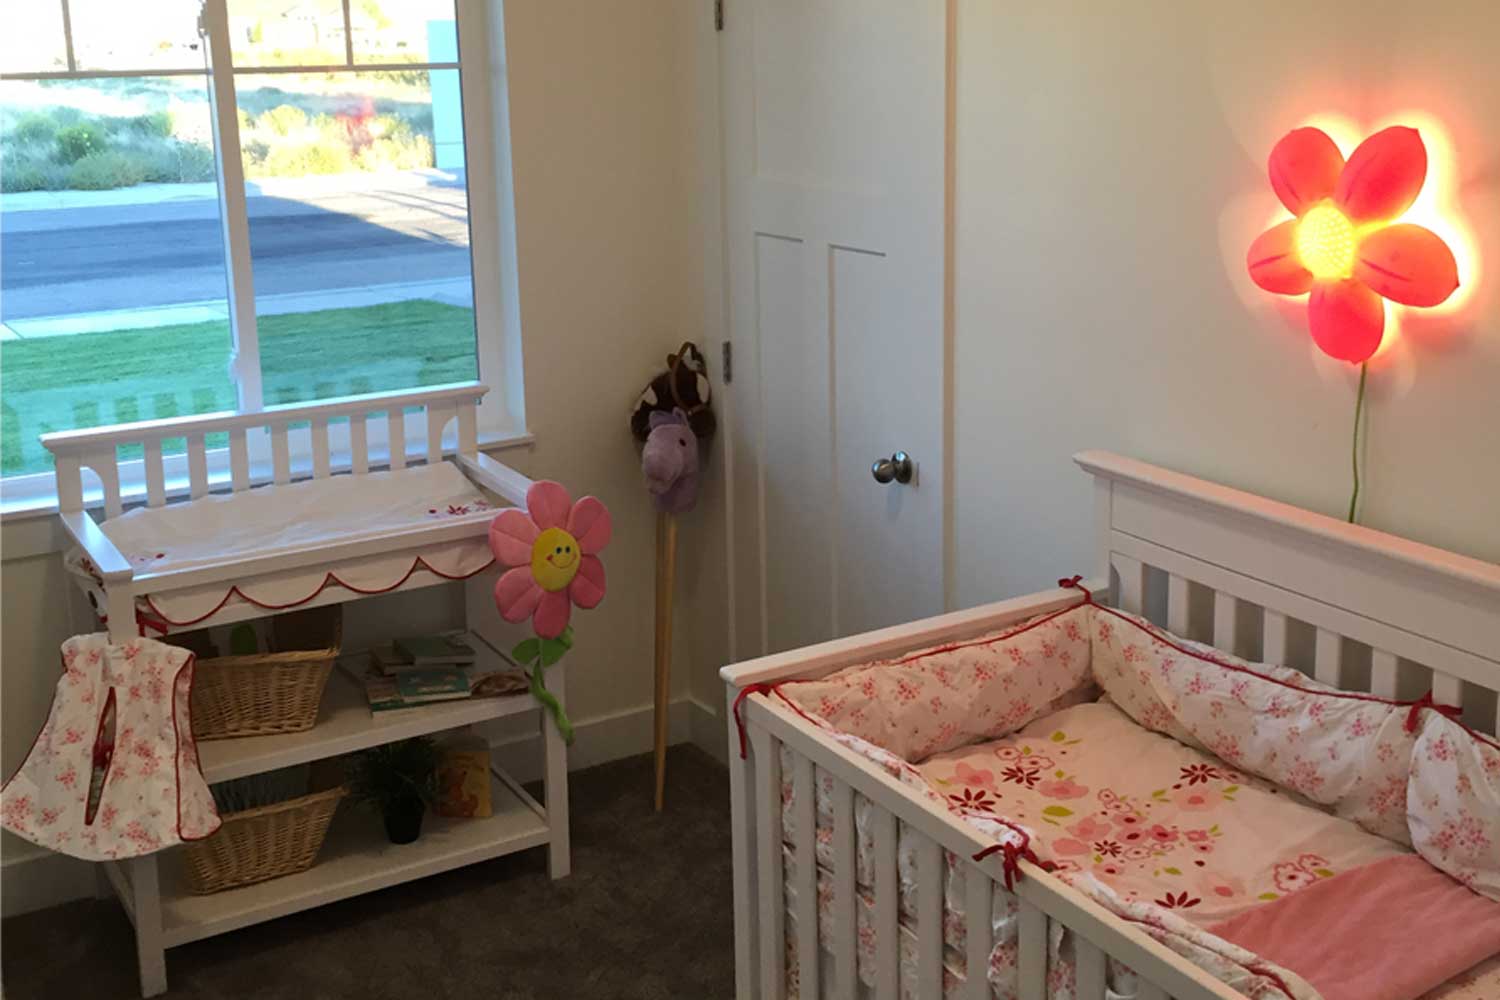 nursery room with changing table and crib and soft orange lighting